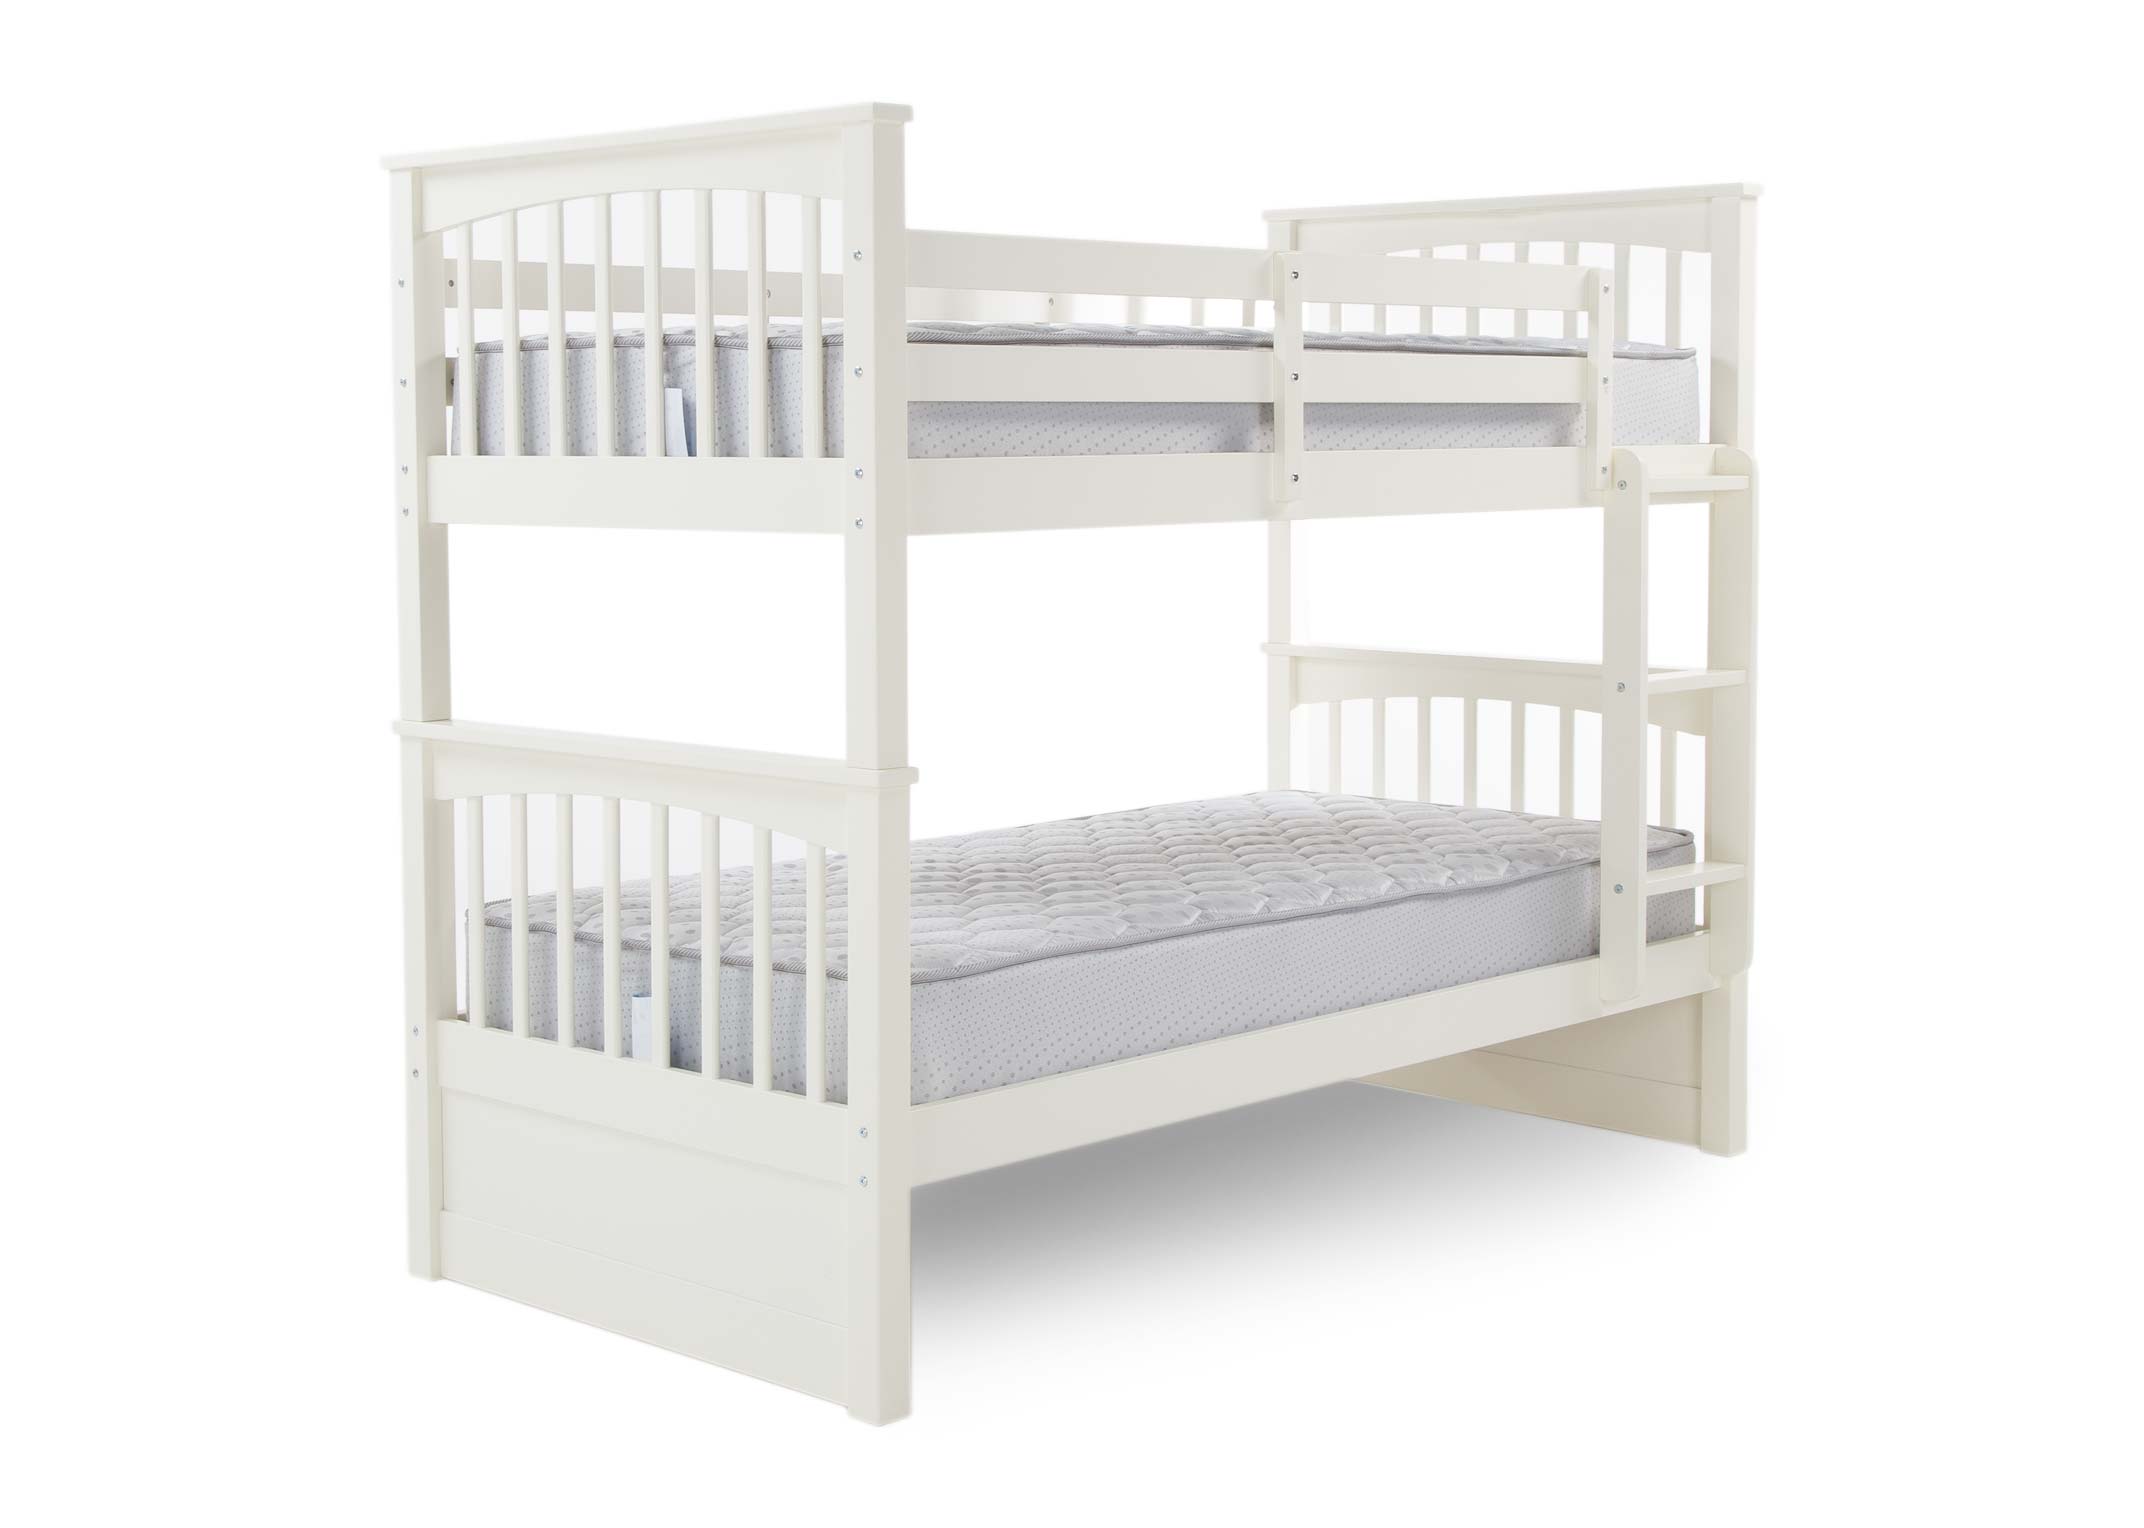 Single 3 Ft Off White Bunk Beds, White Bunk Beds With Double Bed